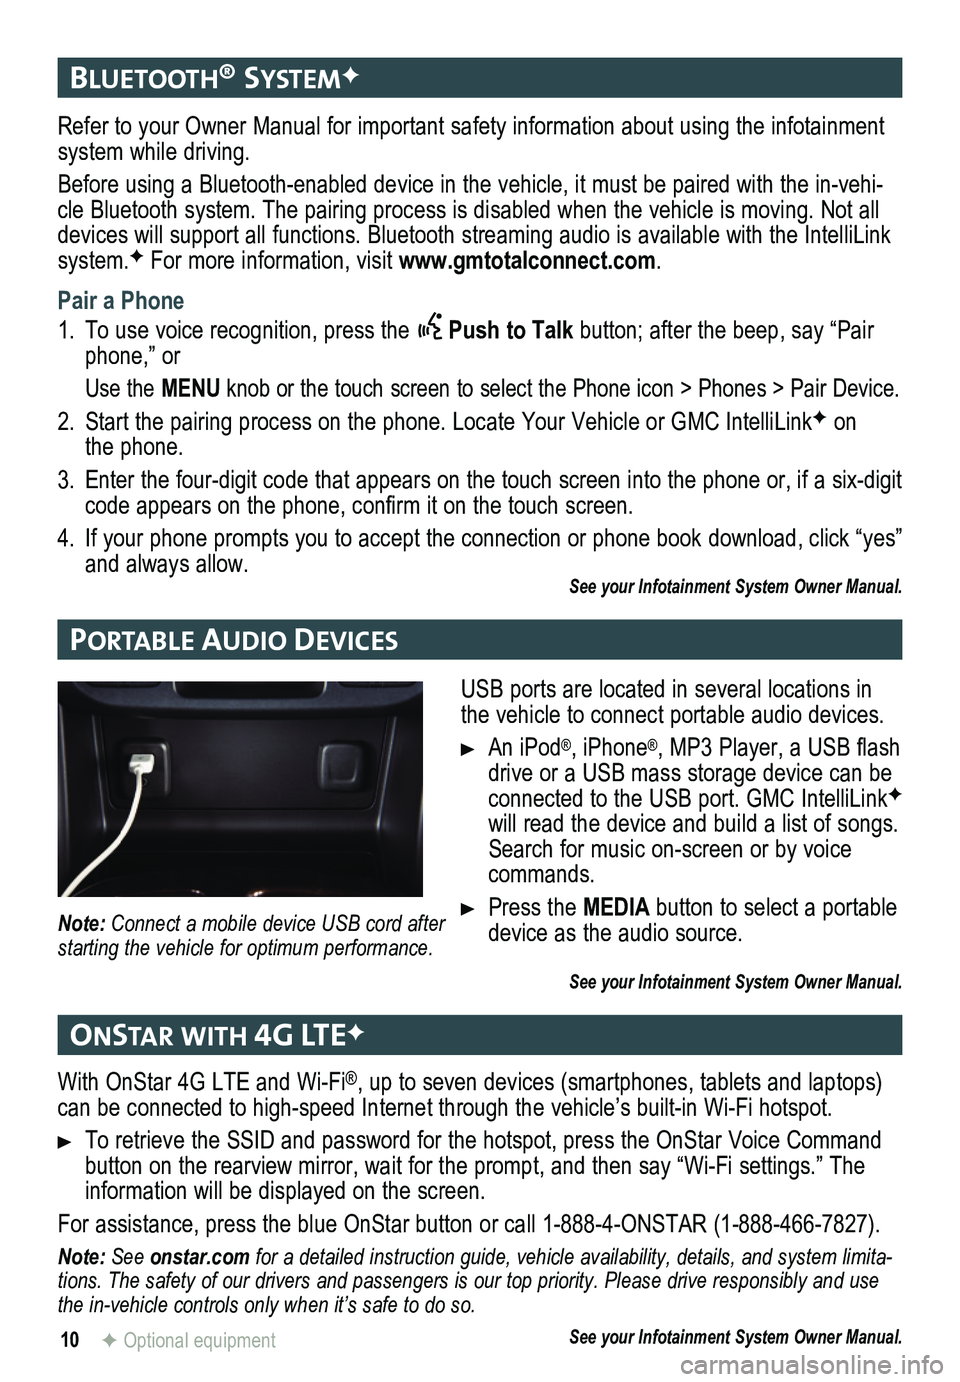 GMC CANYON 2015  Get To Know Guide 10
bluetooth® systemF
Portable audIo devIces
onstar WIth 4g lteF
Refer to your Owner Manual for important safety information about using \
the infotainment system while driving.
Before using a Blueto